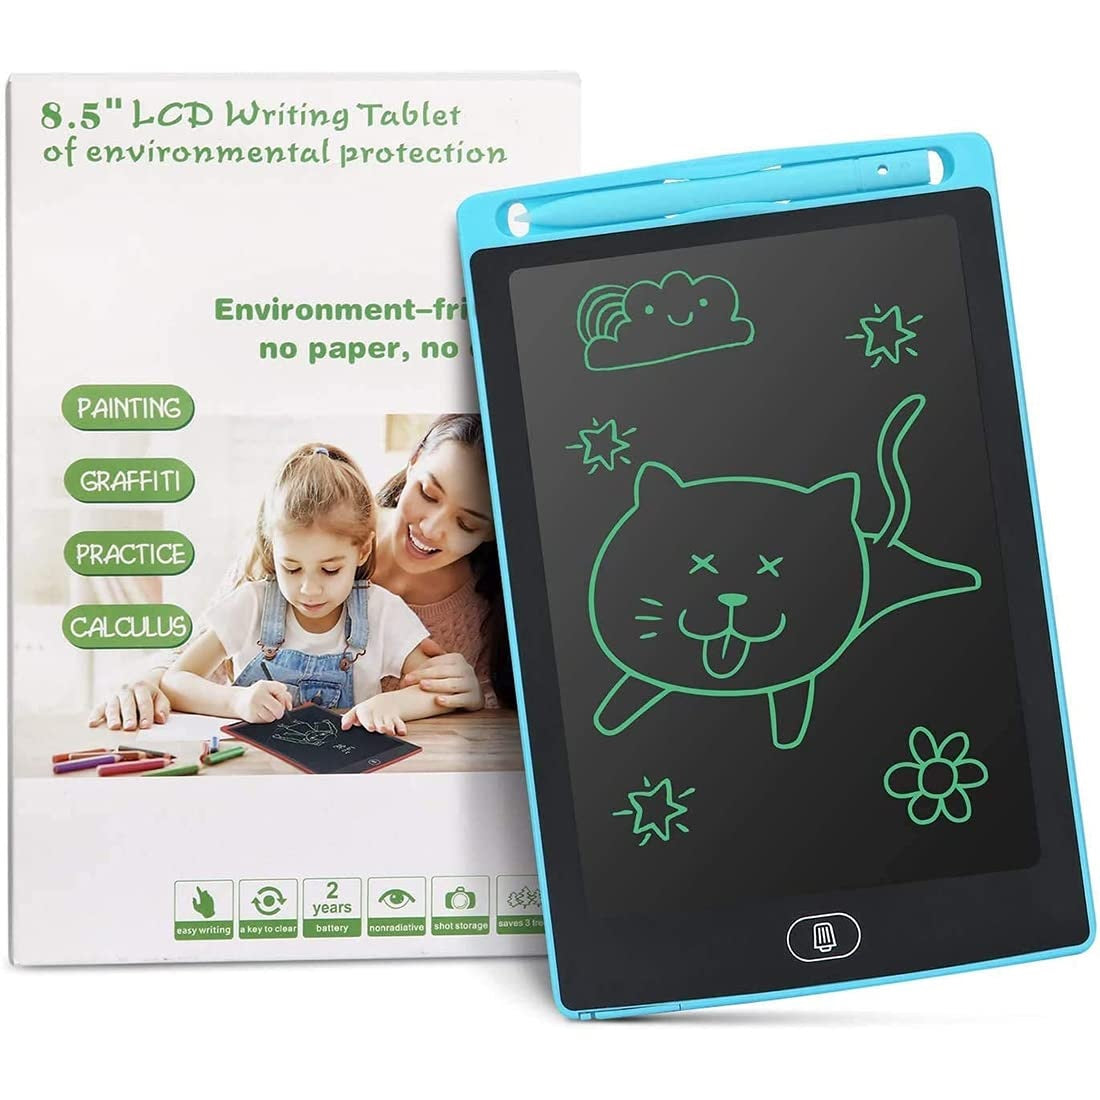 8.5” LCD Writing Tablet for Drawing and Sketching